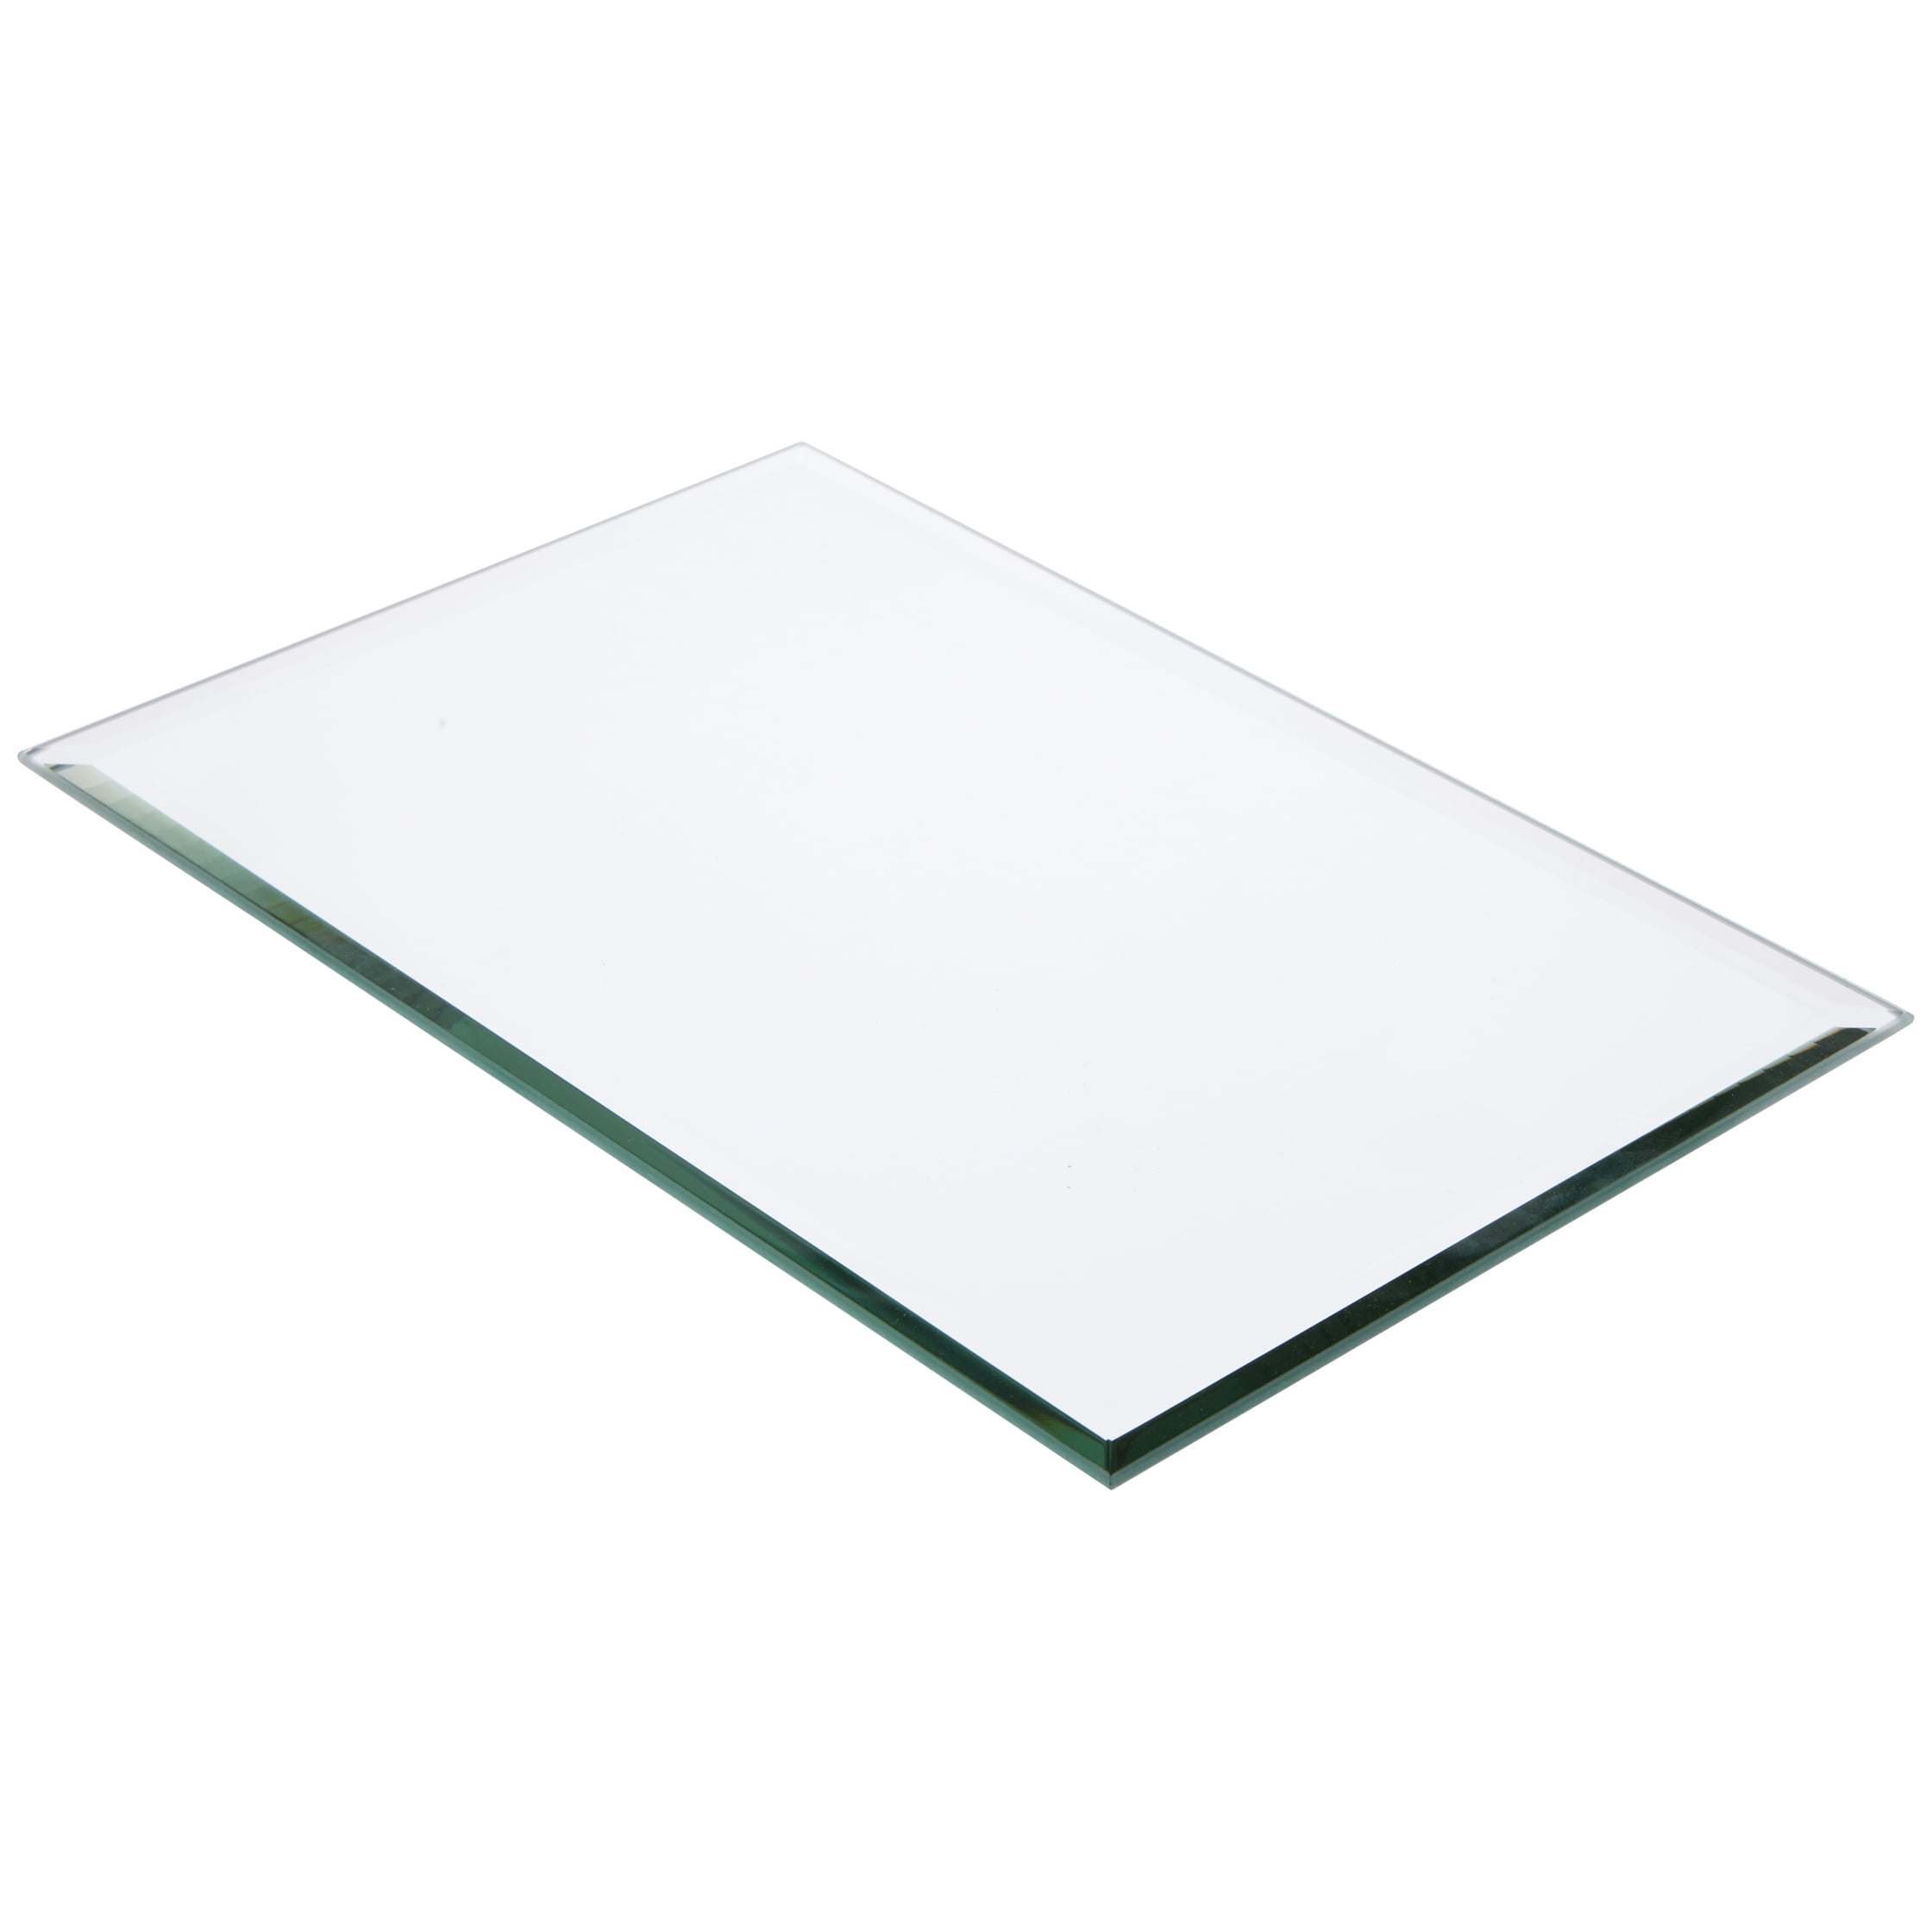 6 inch x 9 inch Plymor Rectangle 5mm Beveled Glass Mirror Pack of 3 